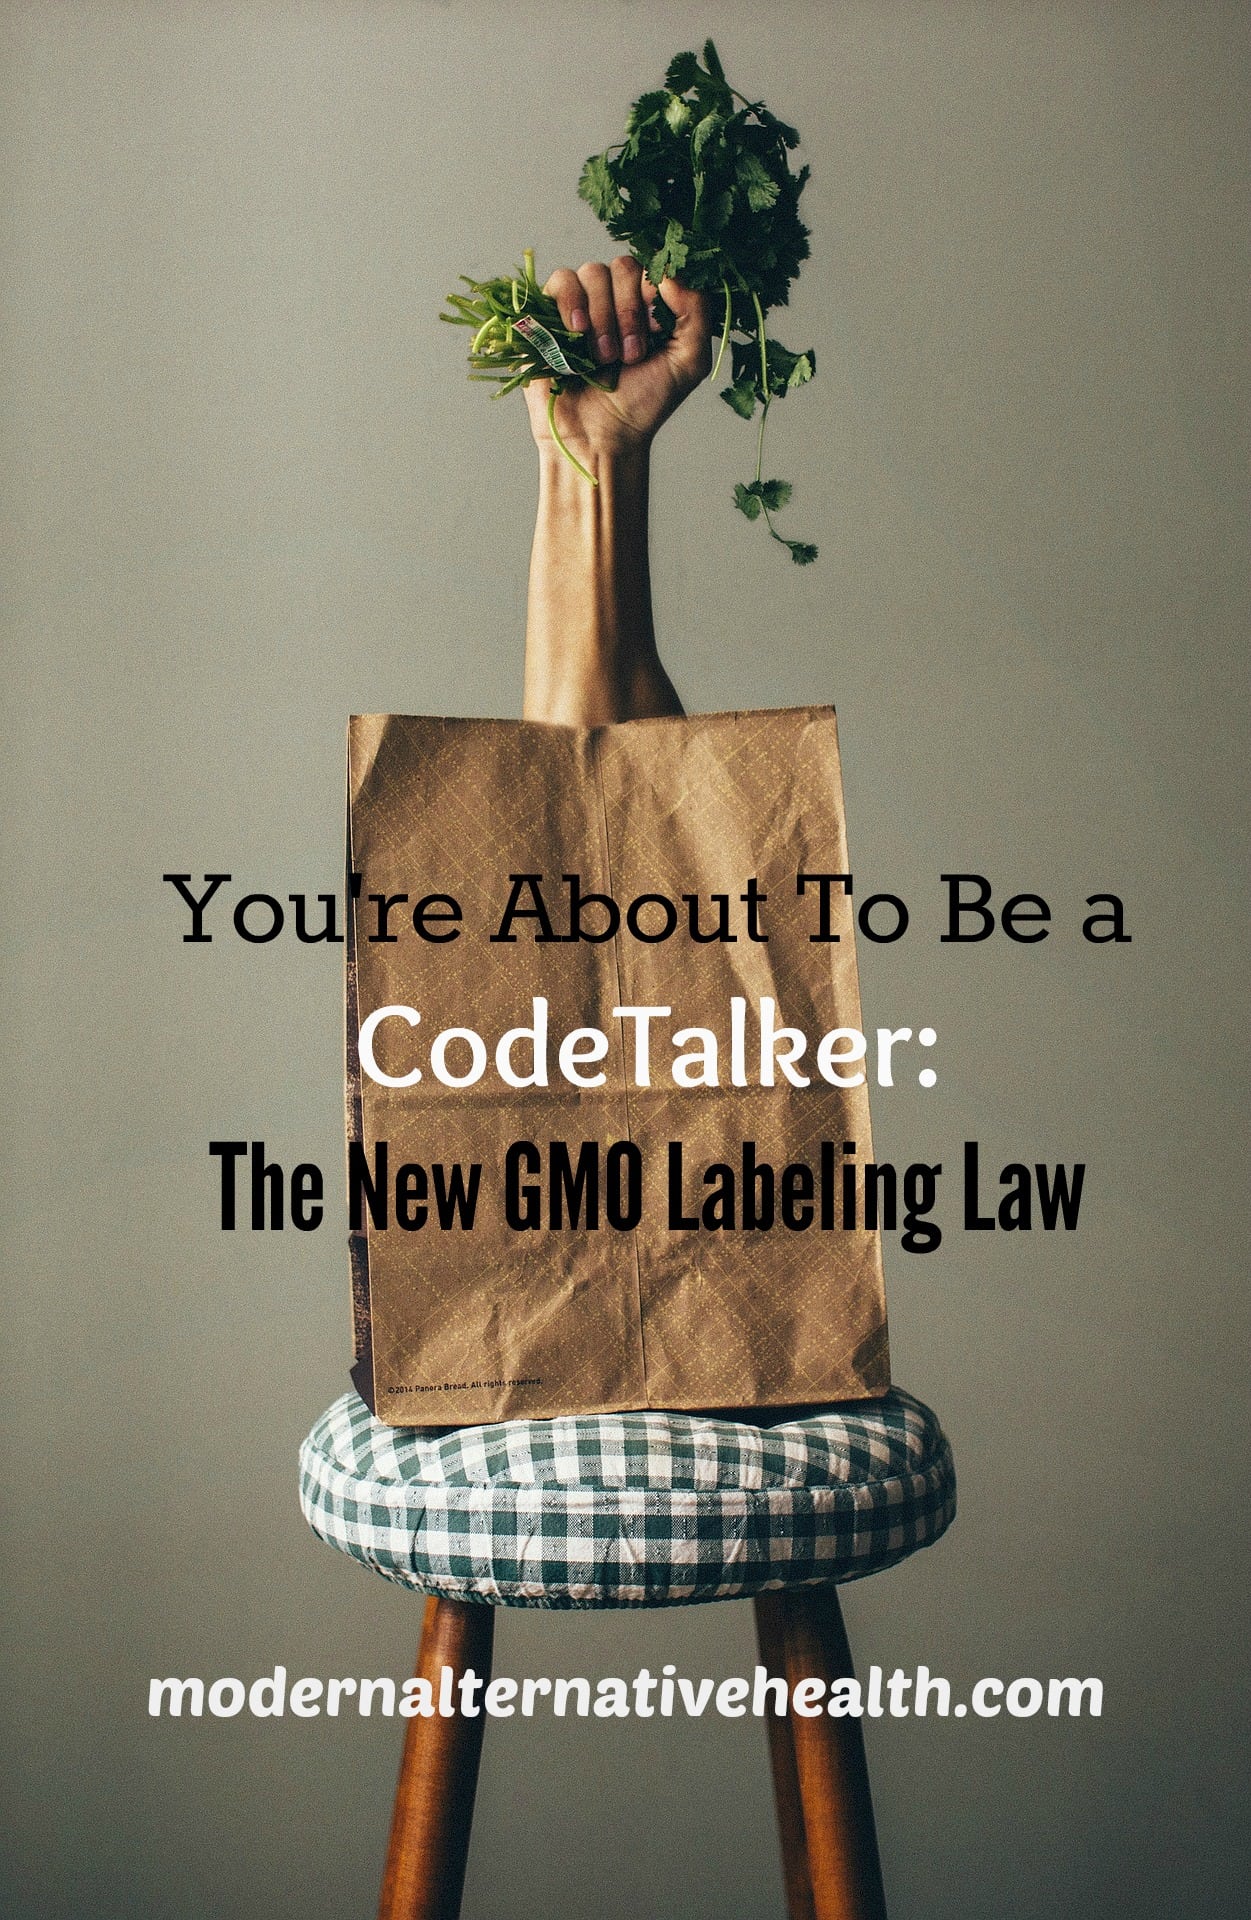 You're About To Be a CodeTalker: The New GMO Labeling Law